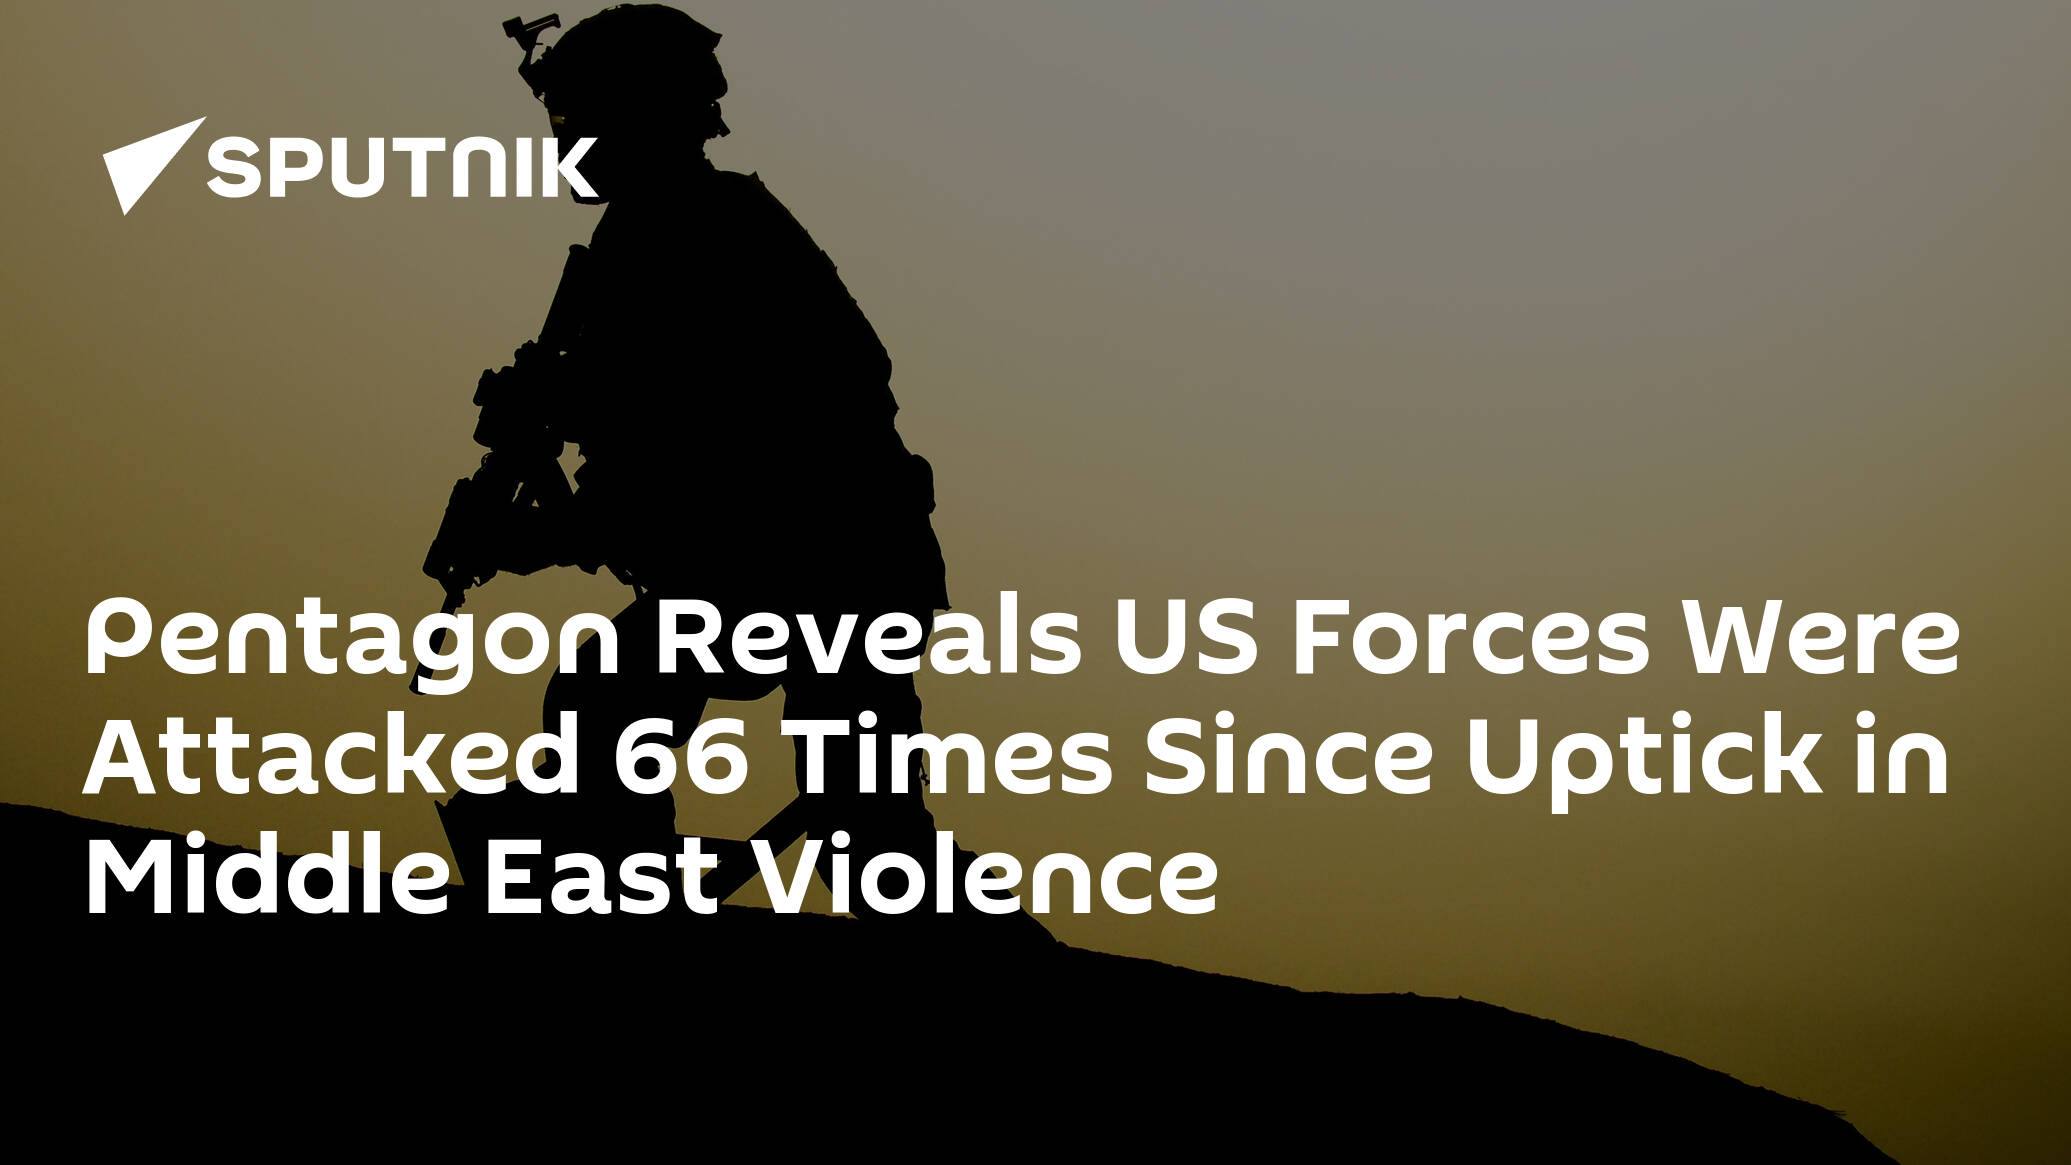 Pentagon Reveals US Forces Were Attacked 66 Times Since Uptick in Middle East Violence